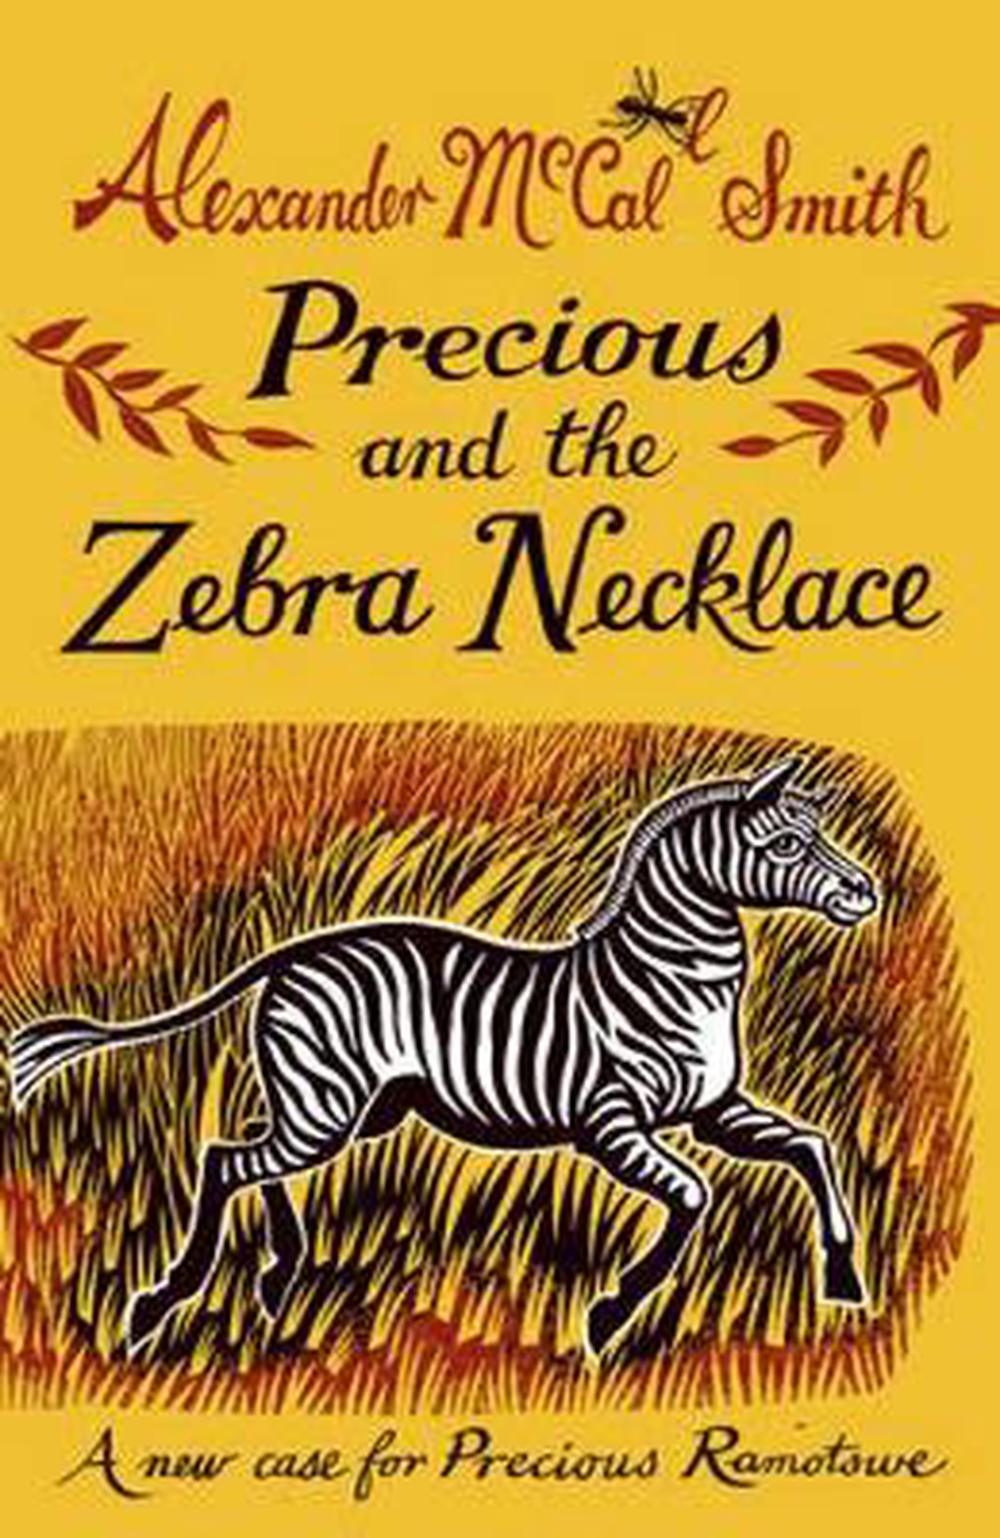 Precious and the Zebra Necklace by Alexander Mccall Smith, Hardcover ...